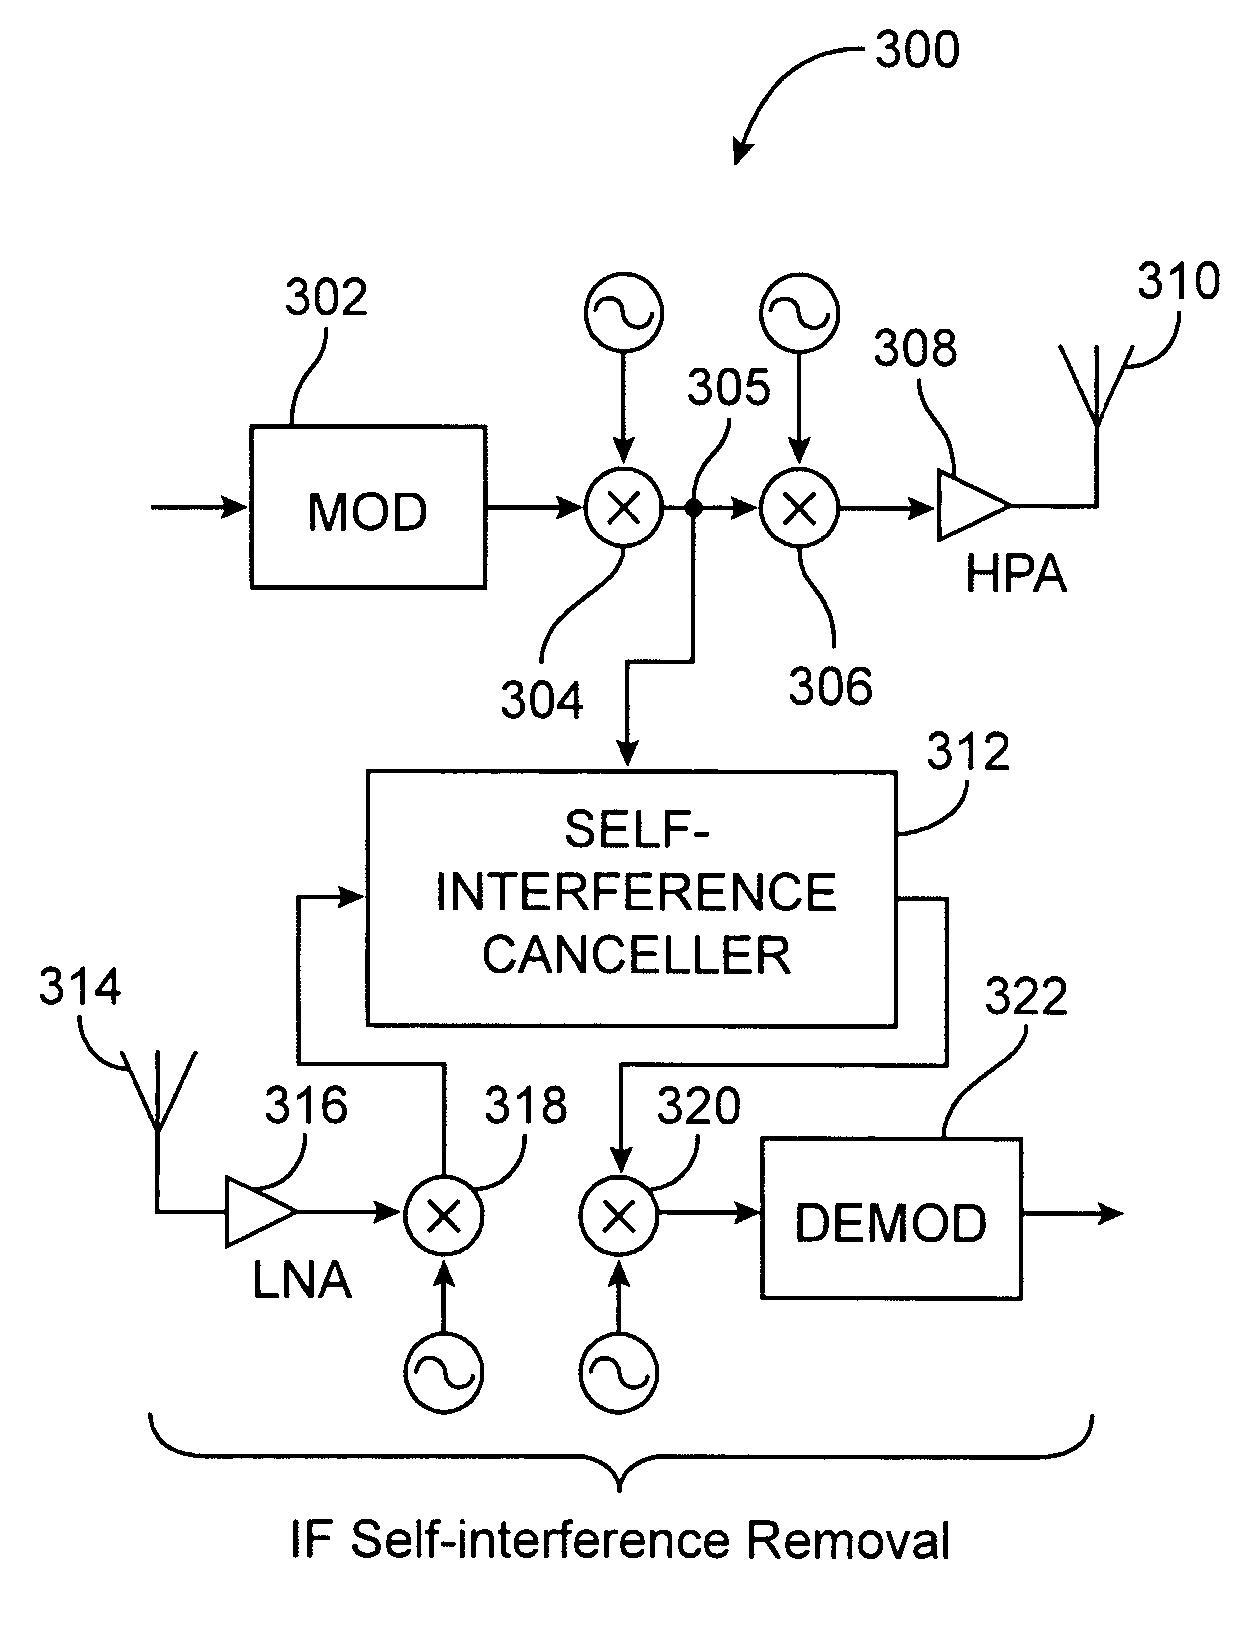 Relayed communication with versatile self-interference cancellation